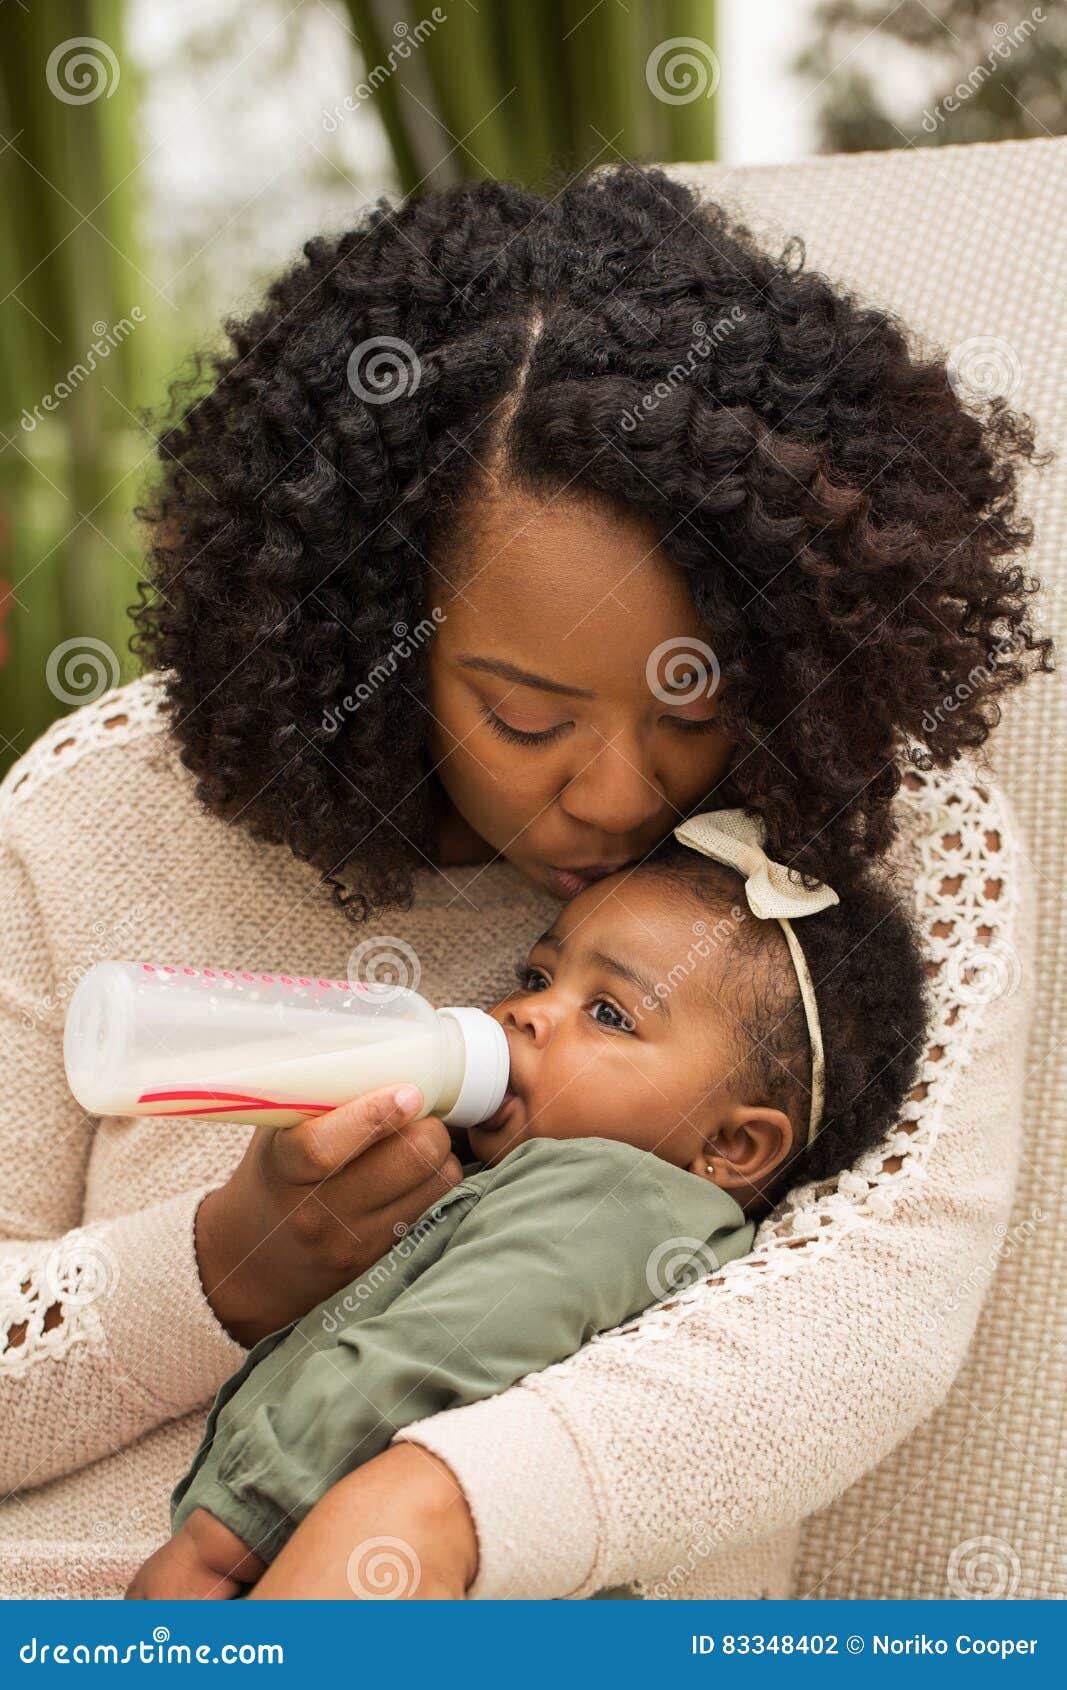 portrait of woman feeding her daughter with a bottle.